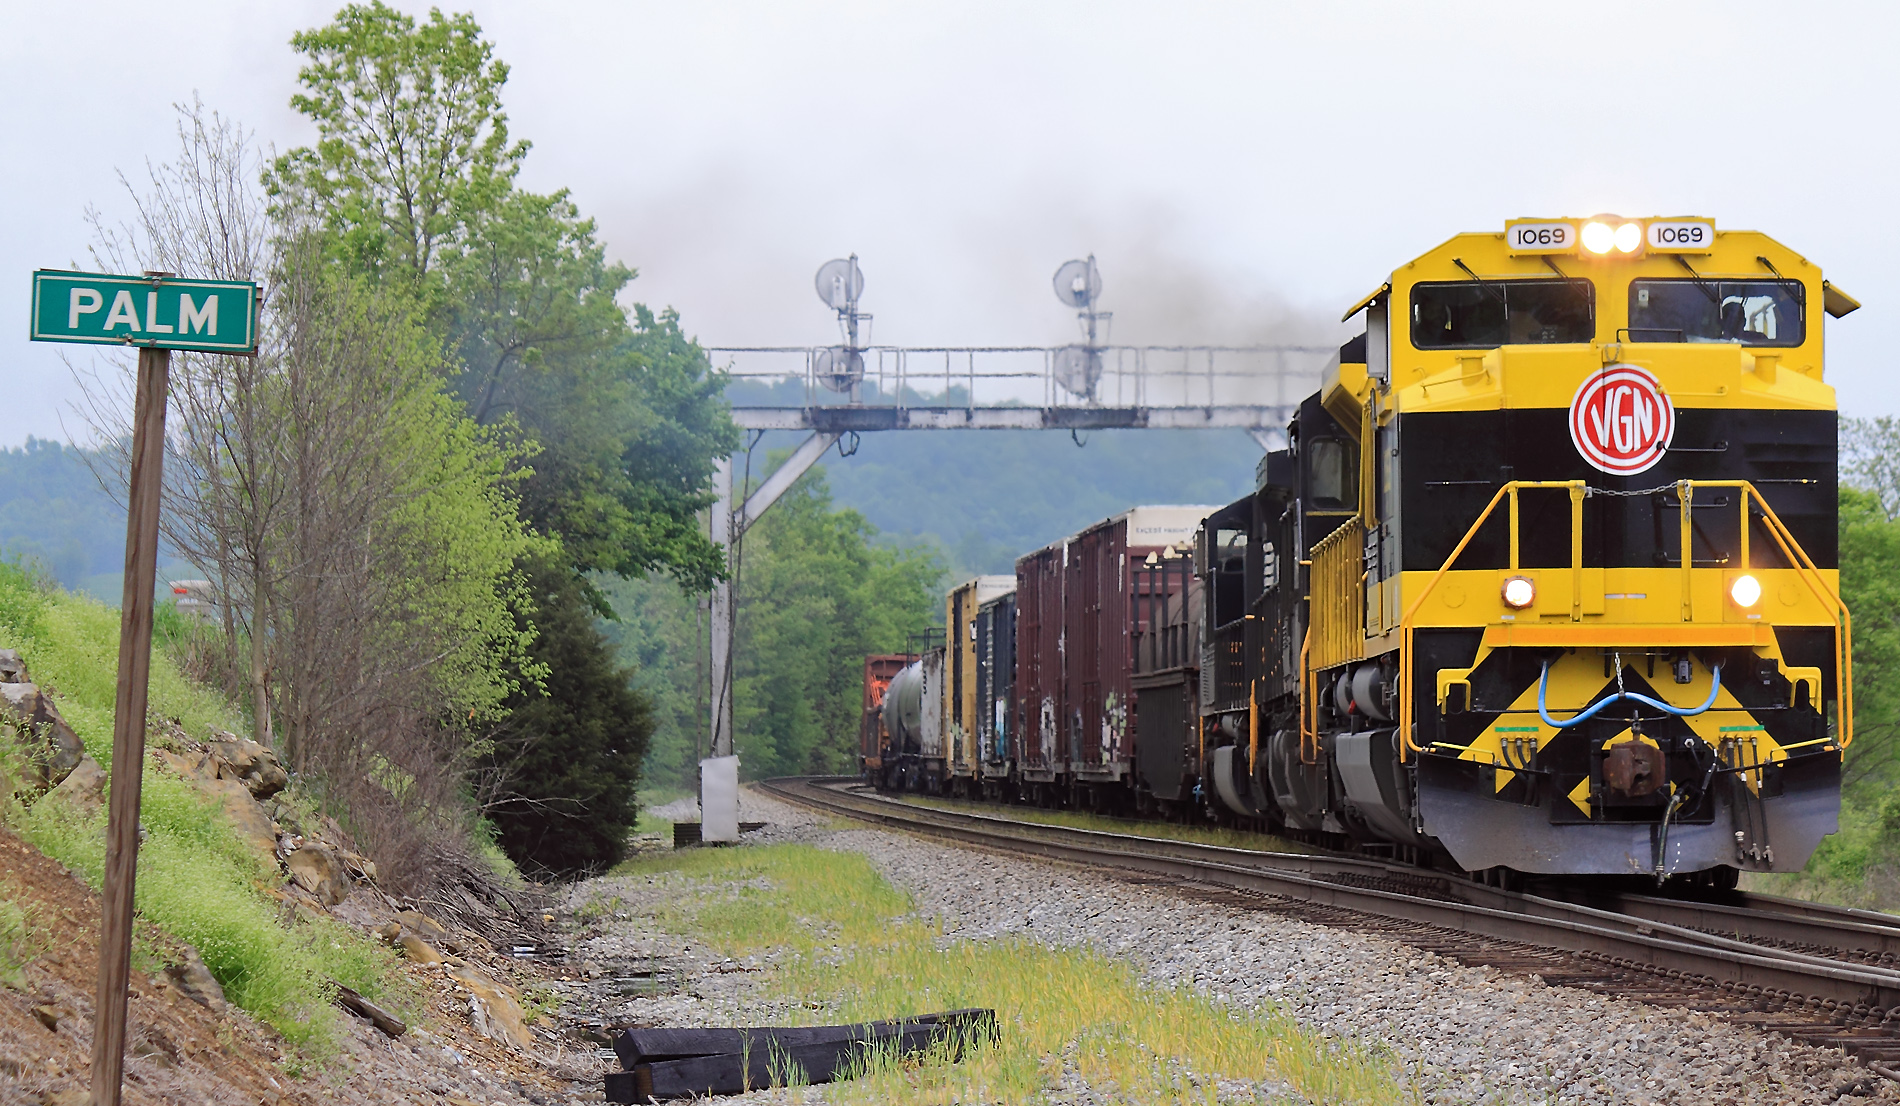 After meeting a pair of Southbound intermodals, Virginian 1069 gets train 142 back on the move at Palm 